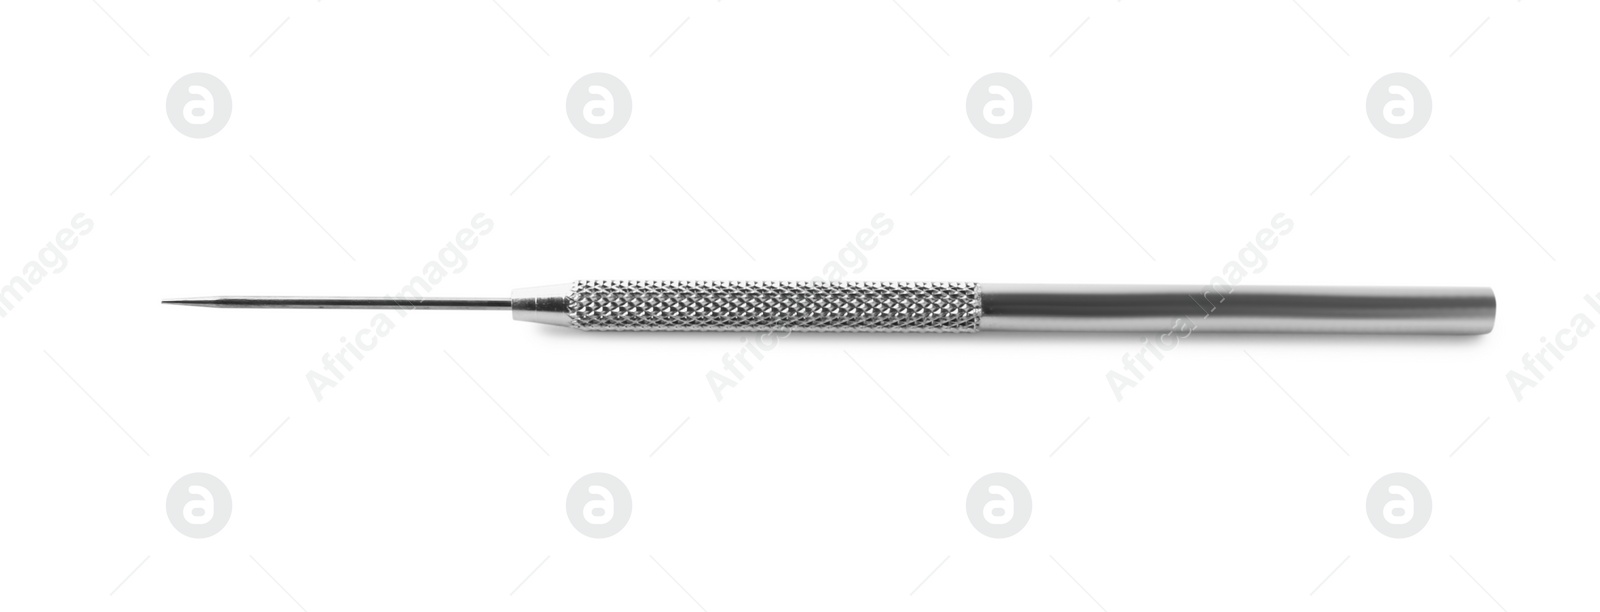 Photo of Stainless steel needle for clay modeling isolated on white